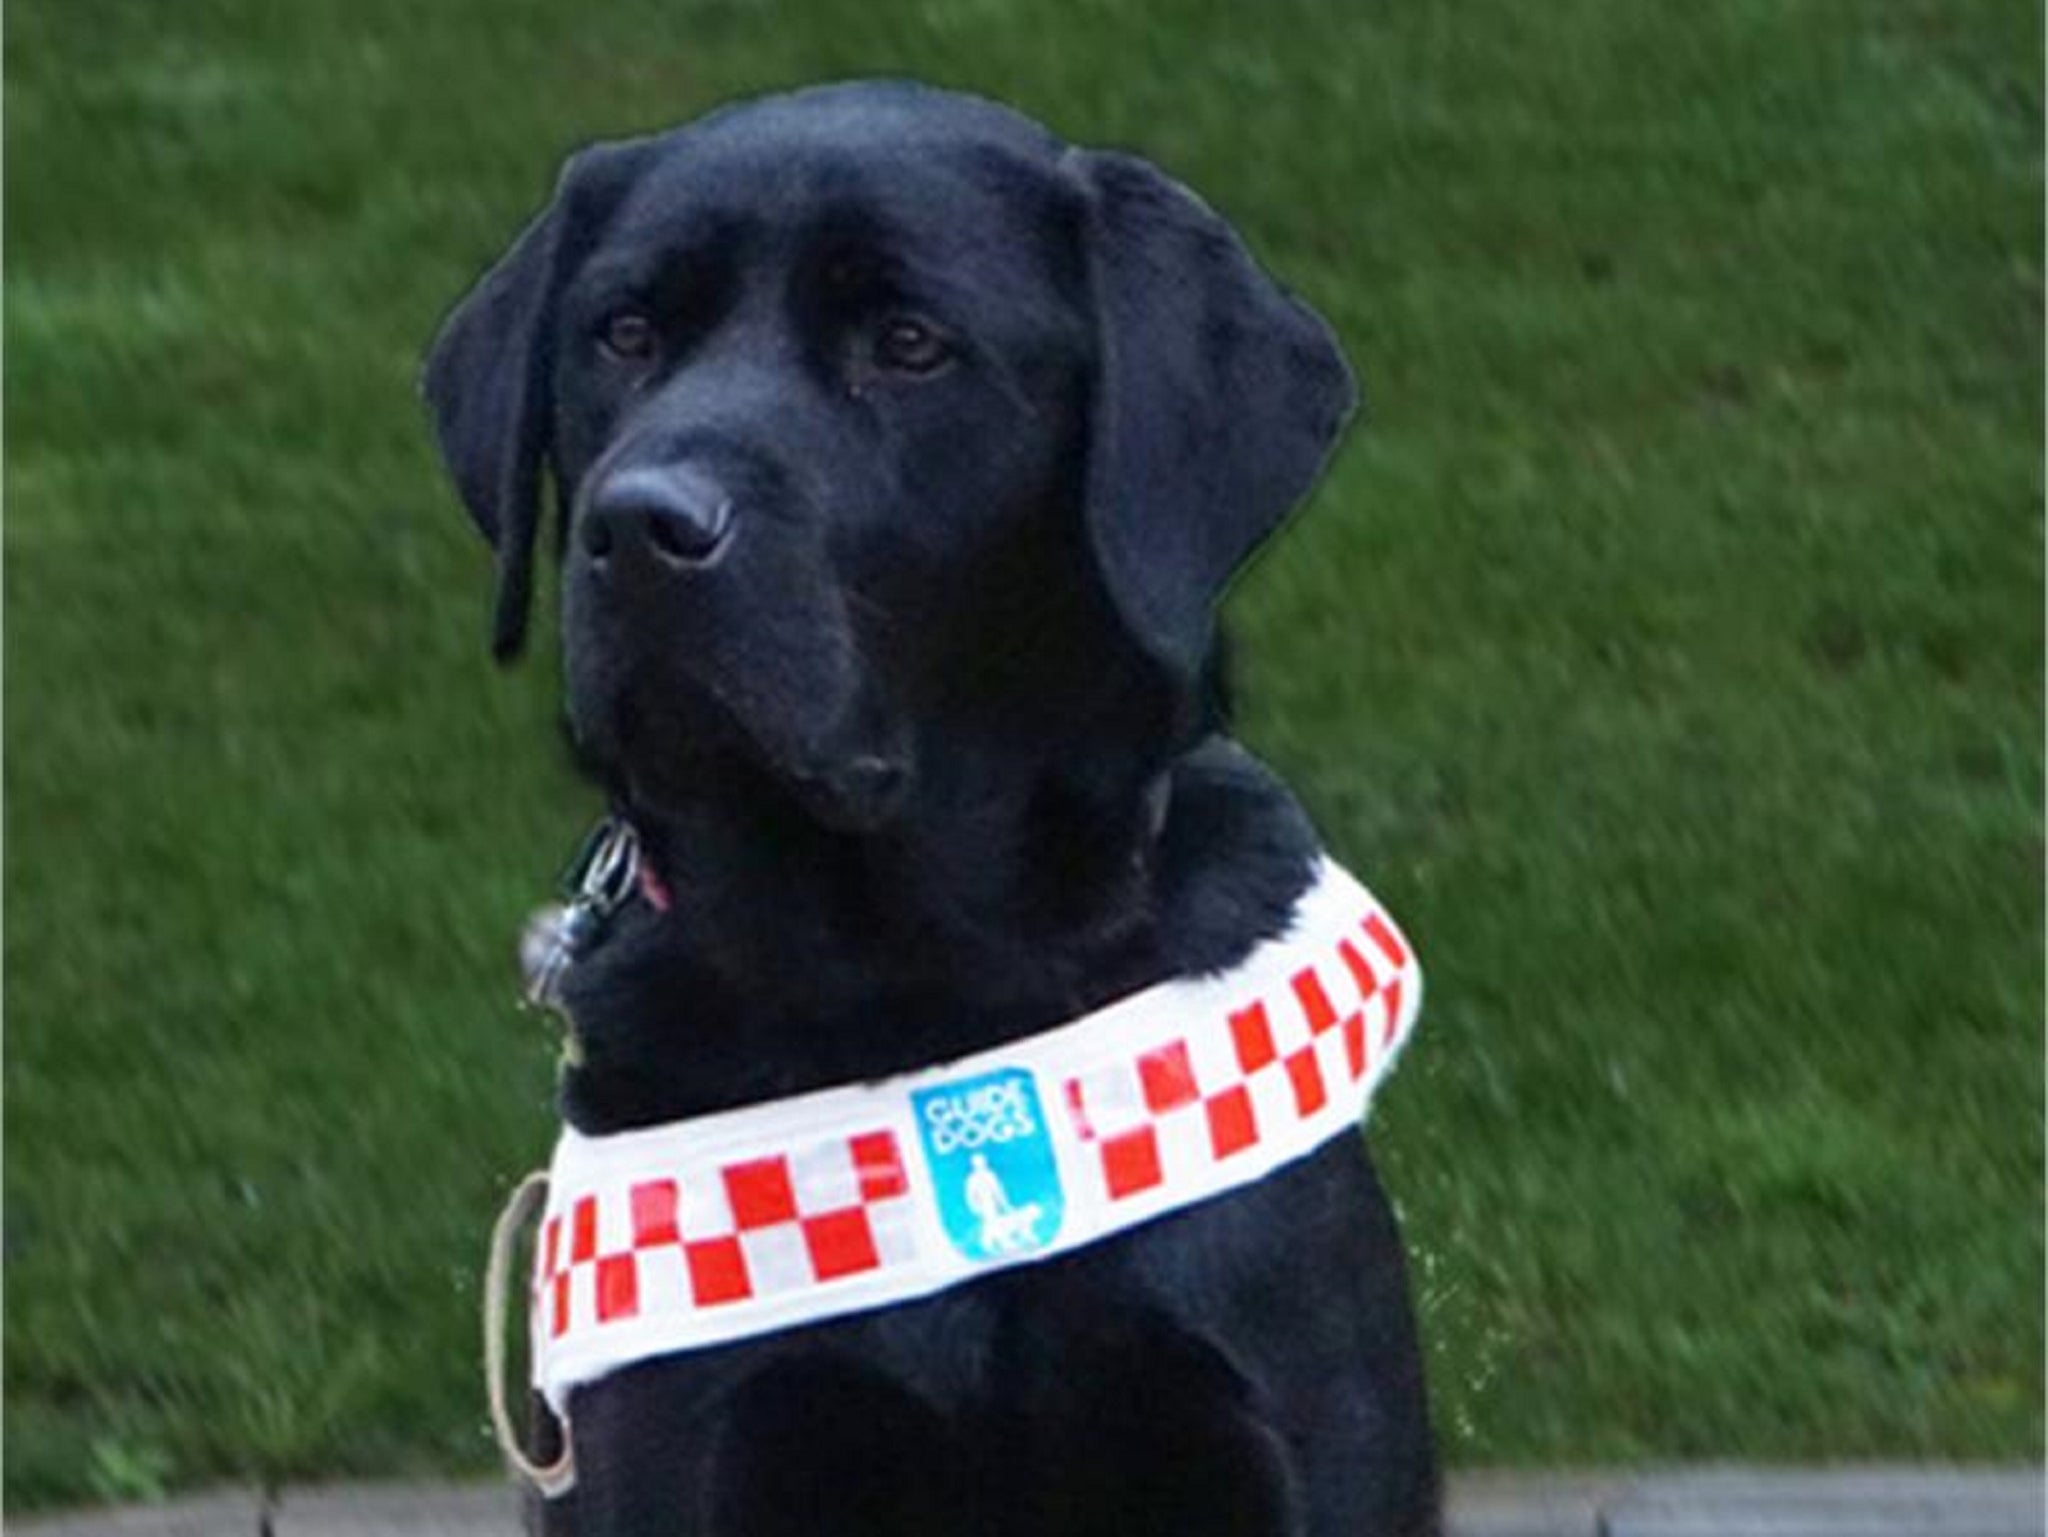 Police are hunting a ‘youth’ who kicked guide dog Angus in Plymouth